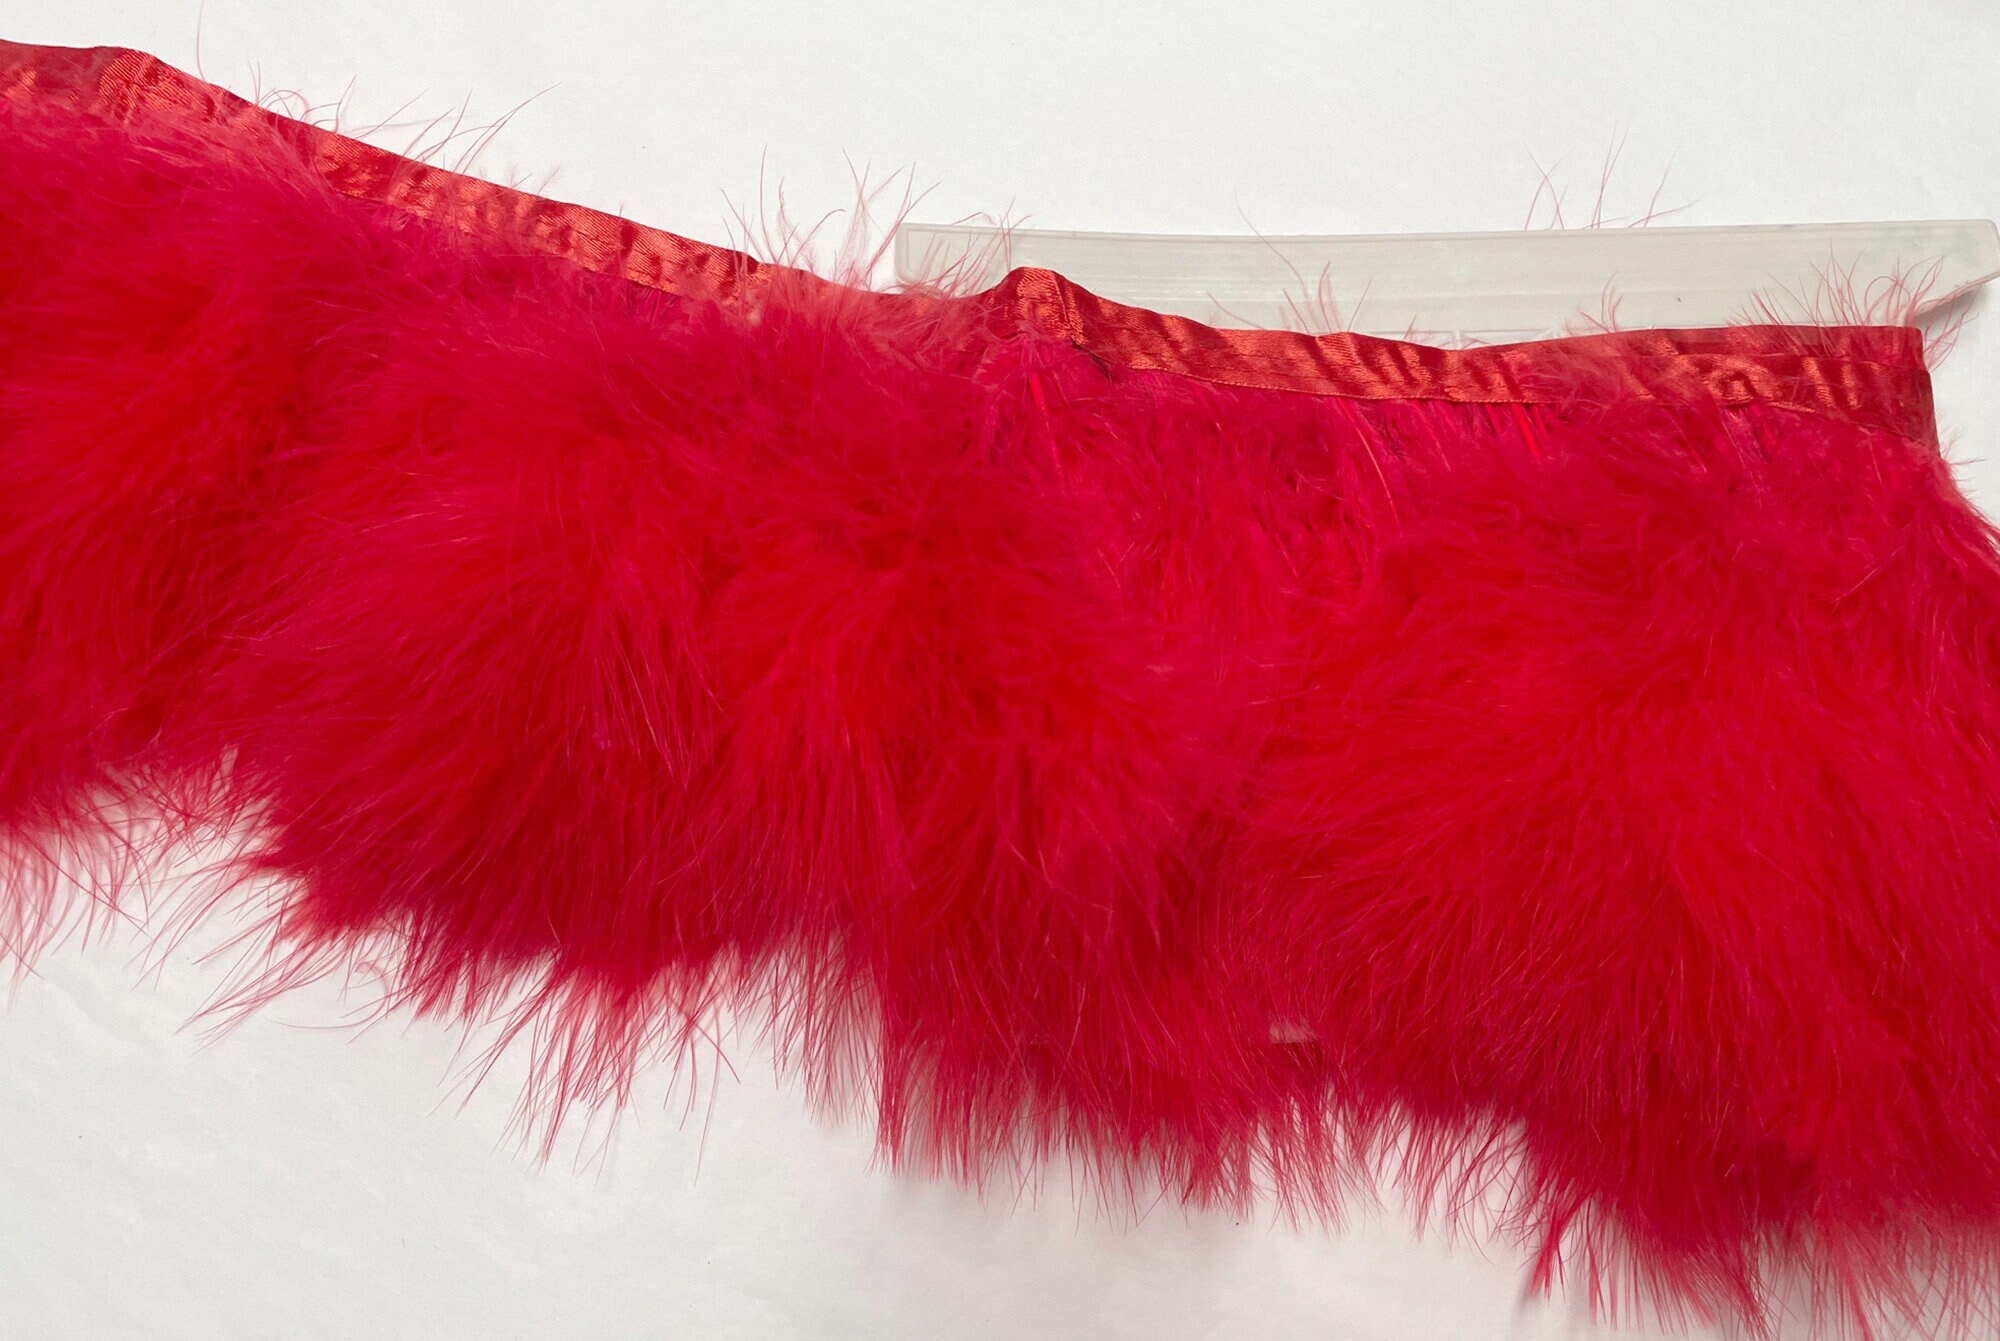 Grab Bag Marabou Feather Puffs BOA Feathers Marabou Feathers Set of 10, 25,  50, or 100 Puffs Grab Bag Assorted Colors Wholesale 